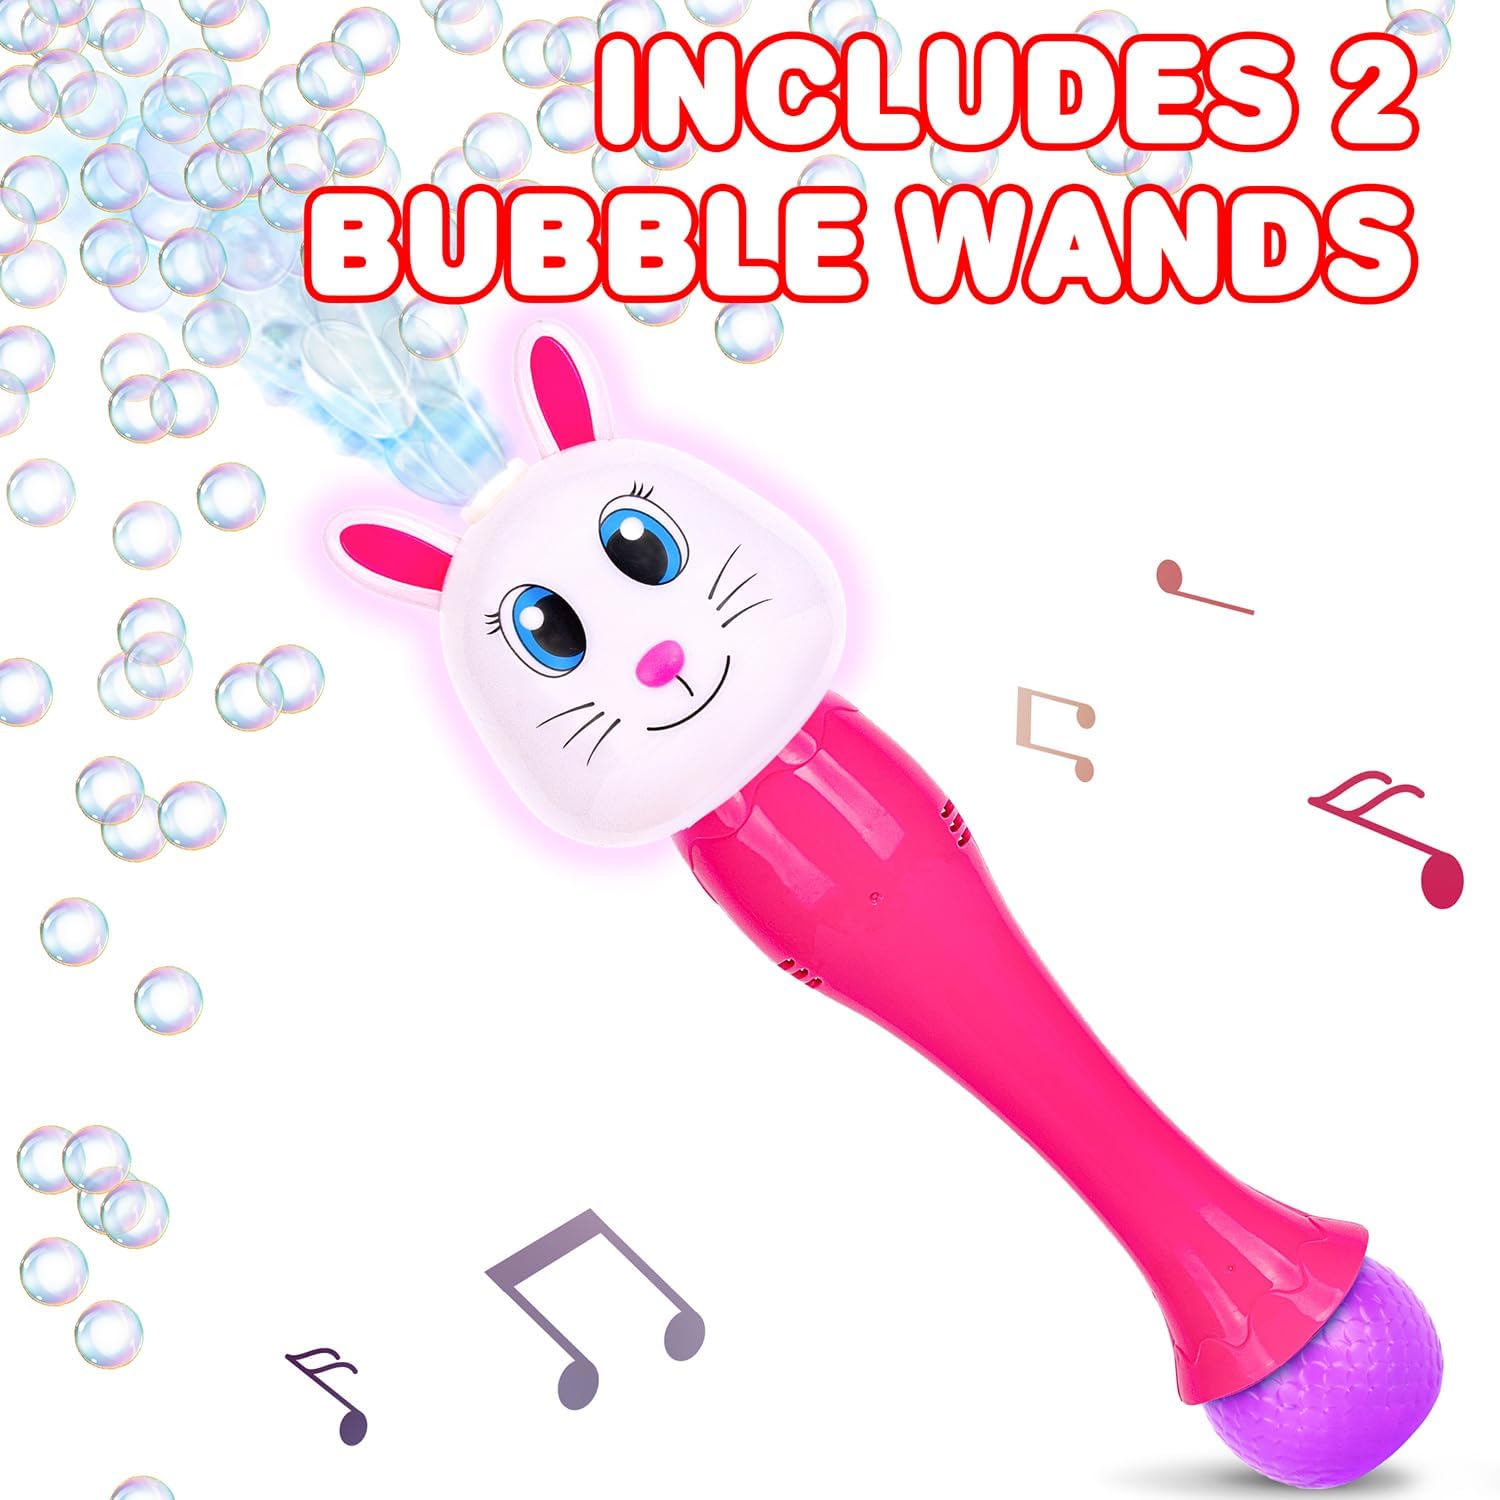 Light Up Bunny Easter Bubble Wands - Set of 2 Bunny Bubble Wands - 14 Inch Illuminating Blower with Thrilling LED & Sound Effect, Bubbles for Kids - Bubble Toys, Easter Basket Stuffers for Toddler